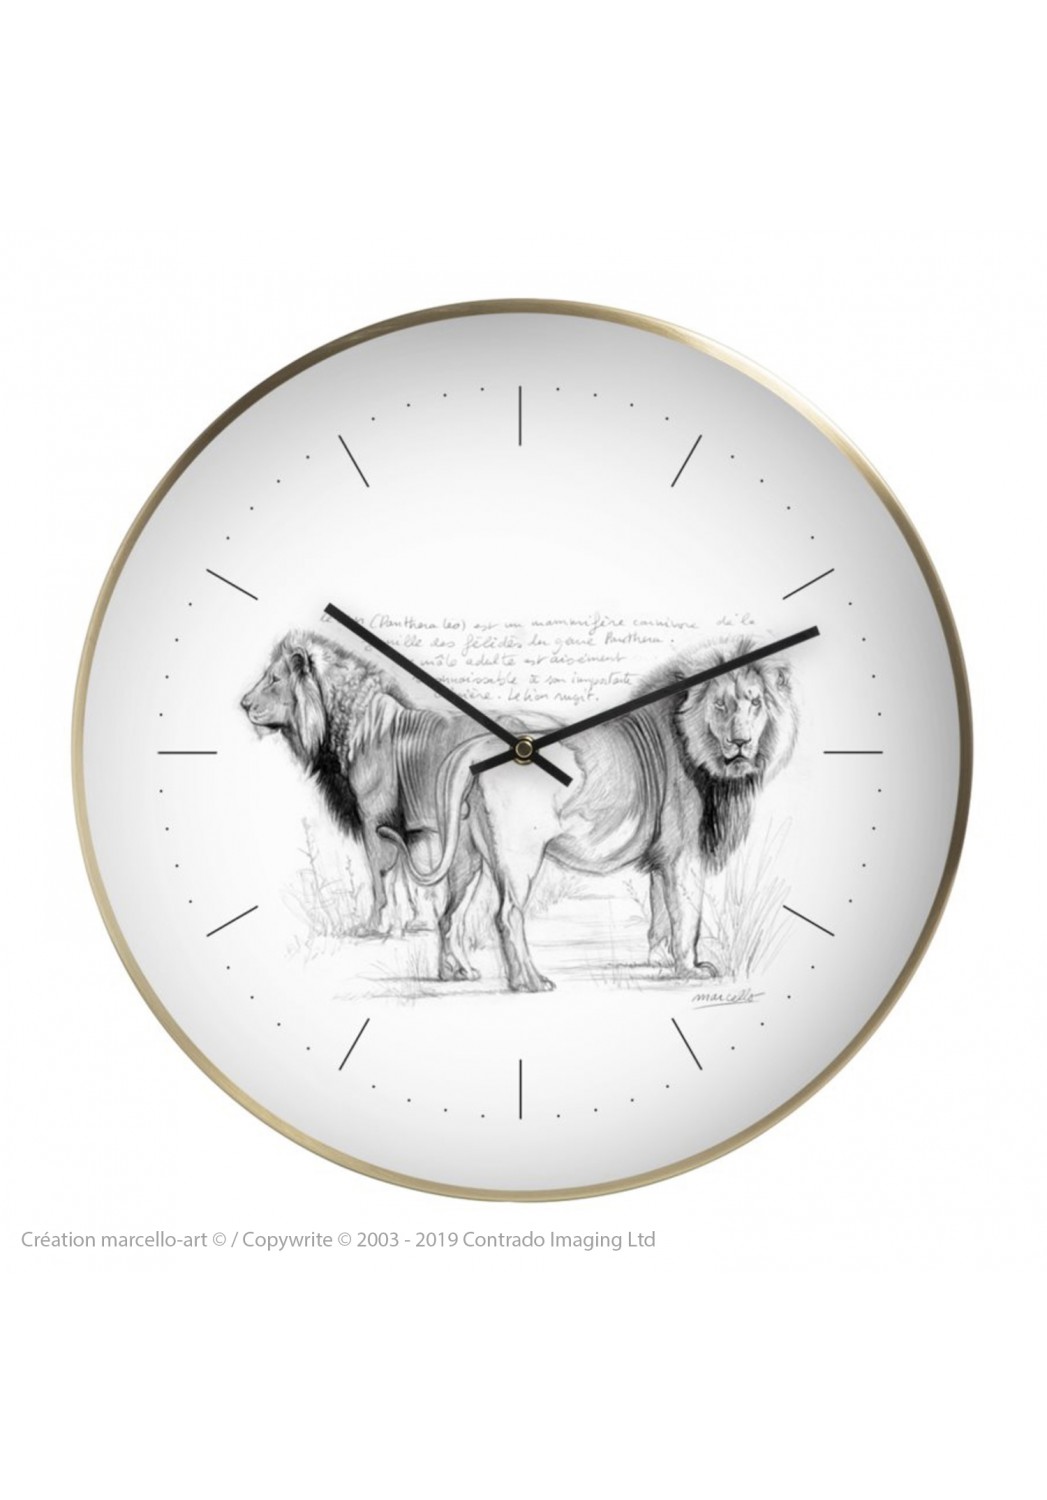 Marcello-art: Decoration accessoiries Wall clock 54 Lions brothers